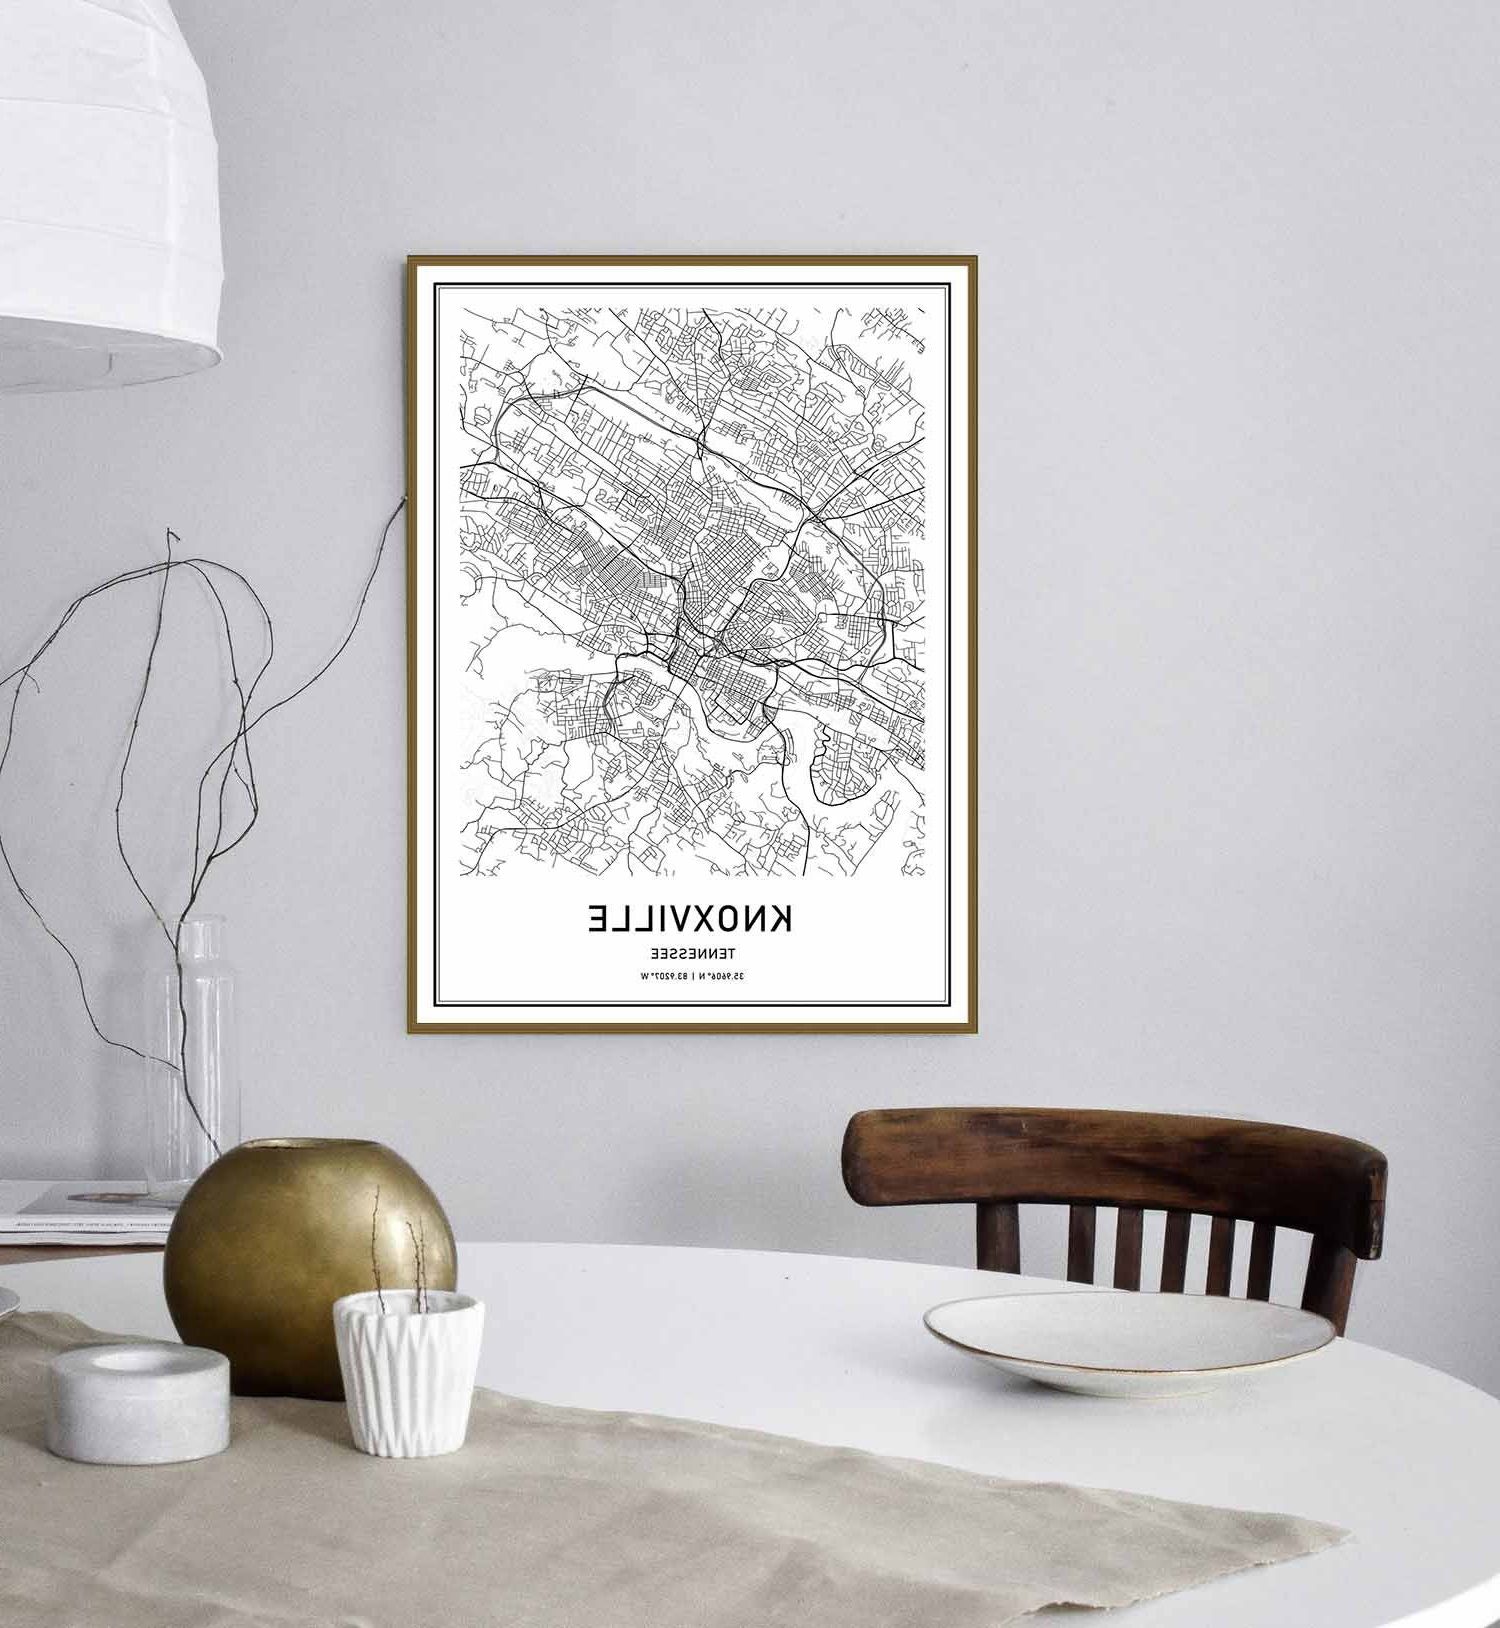 Knoxville Map Print, Tennessee Gift Download, Modern Wall Decor For Office  And Home, Knoxville Tn Black And White Map, Coworker Gift Within 2019 Knoxville Wall Décor (View 8 of 20)